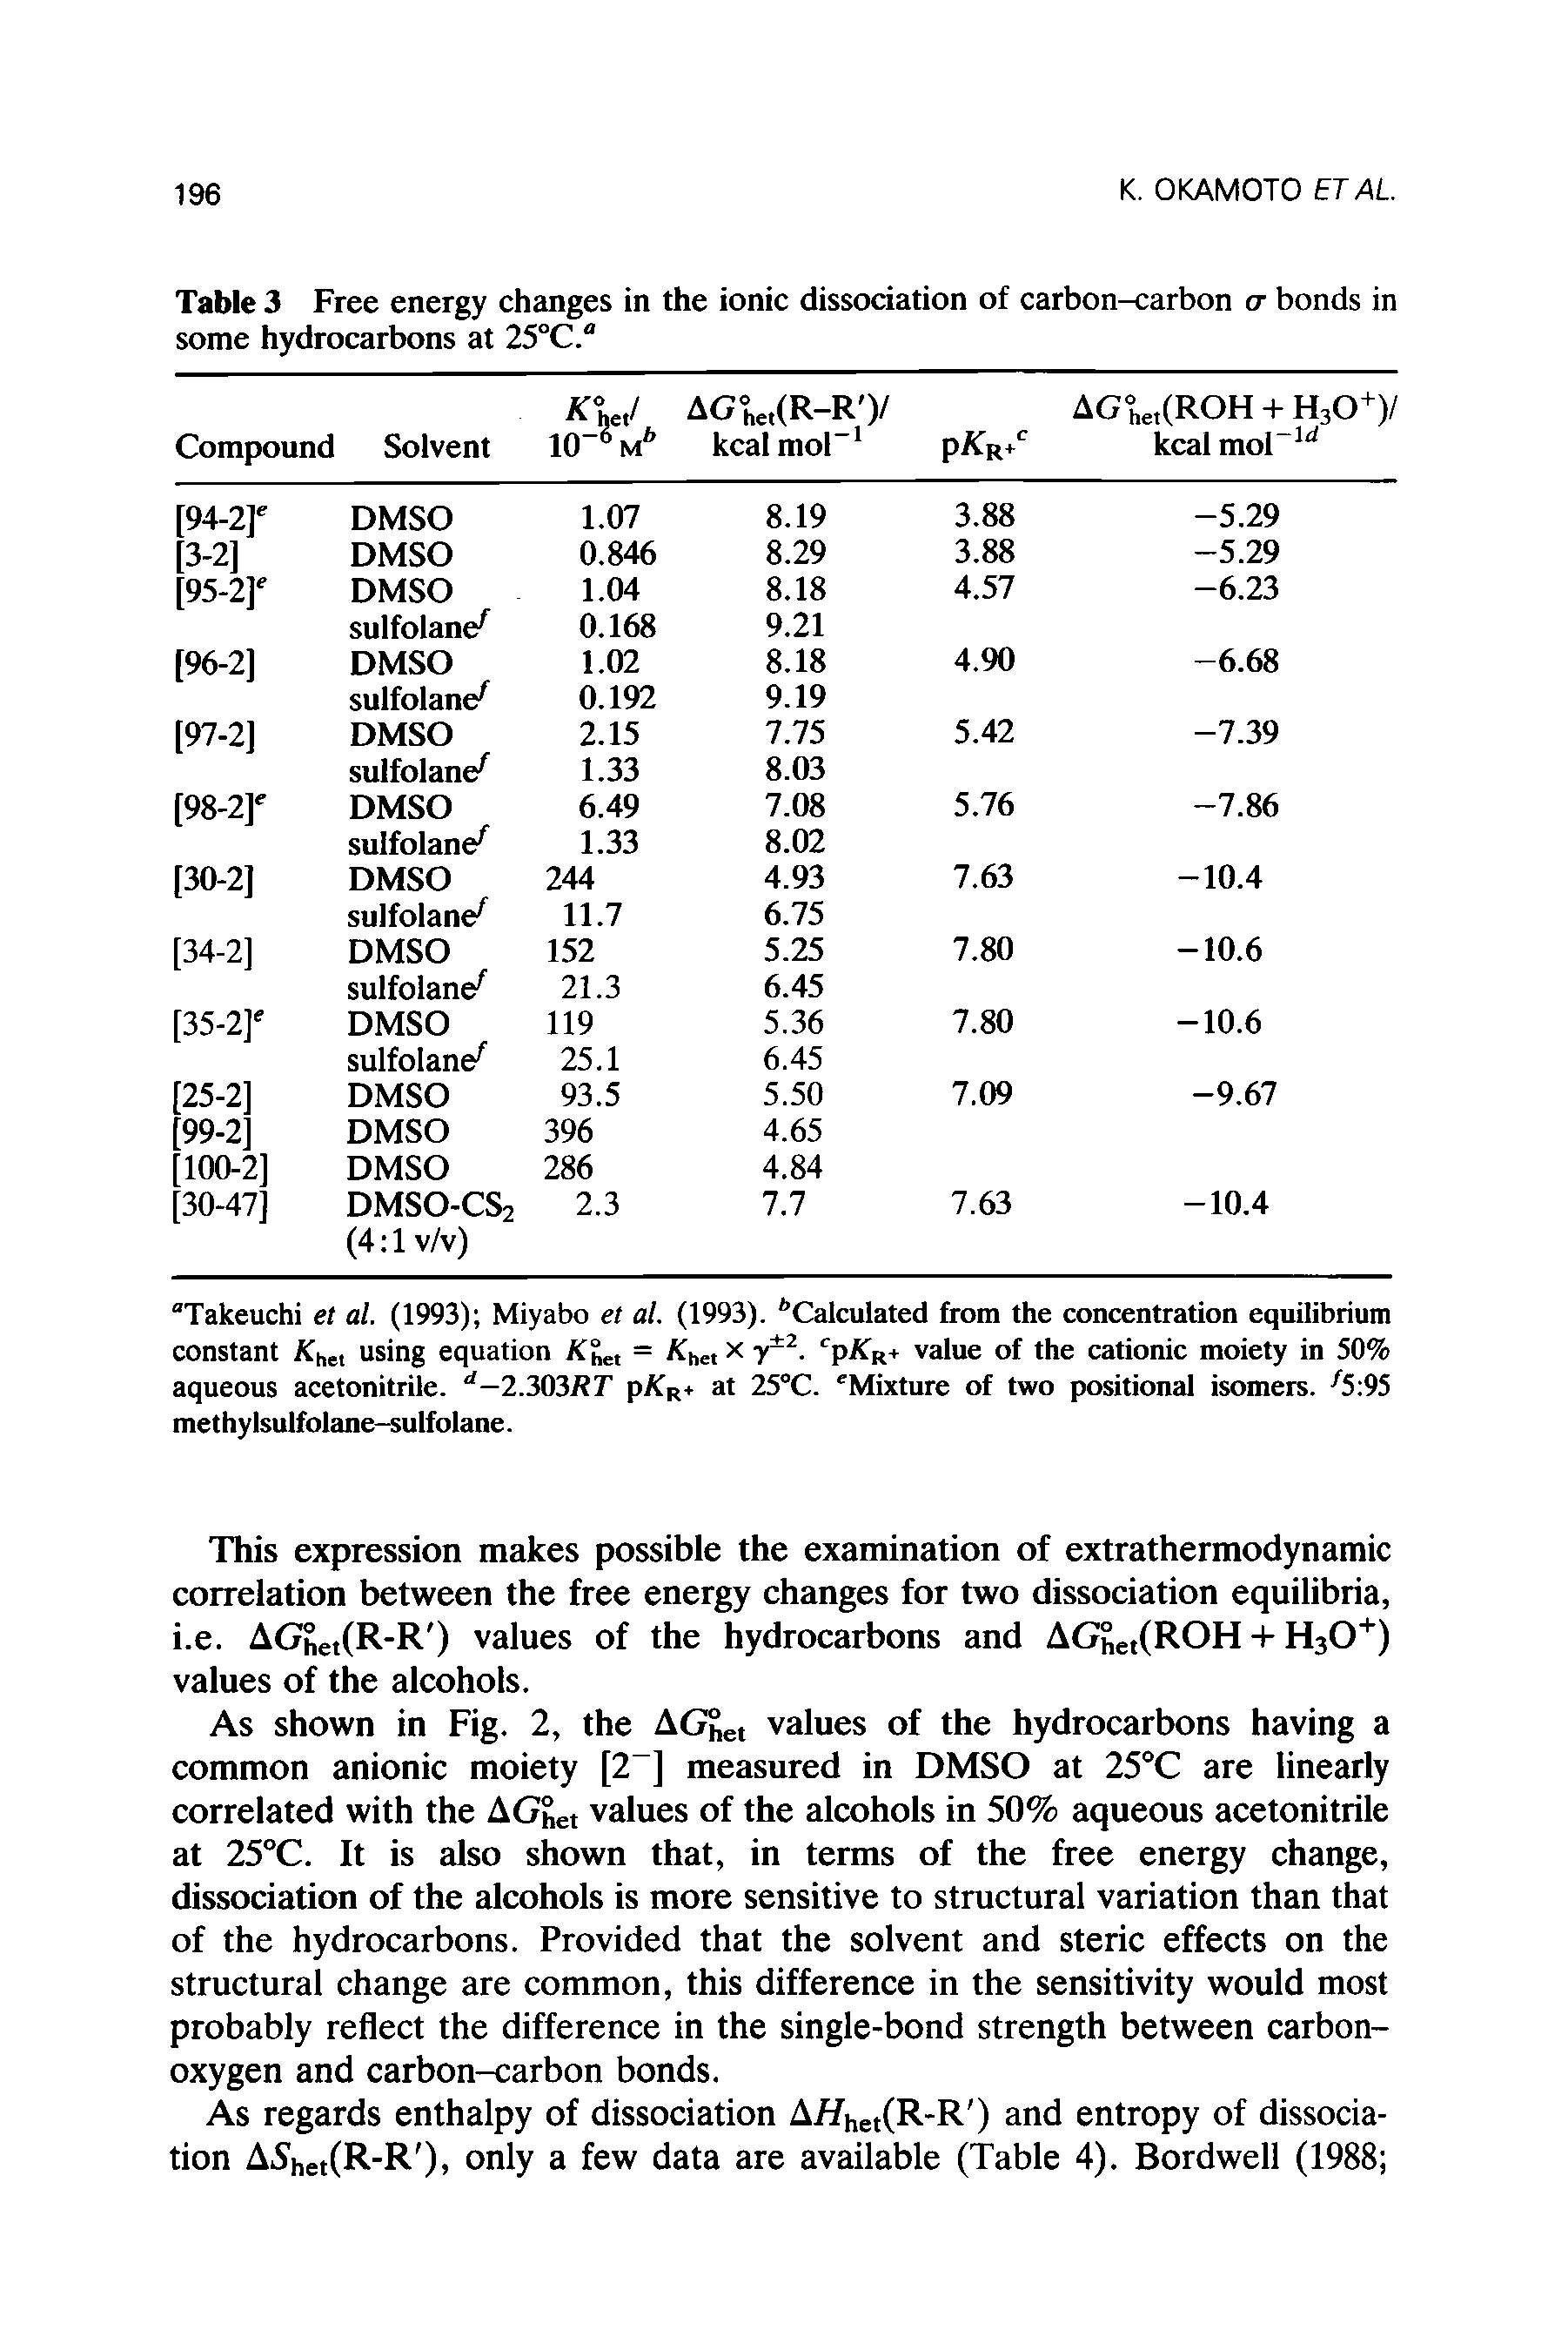 Table 3 Free energy changes in the ionic dissociation of carbon-carbon cr bonds in some hydrocarbons at 25°C. ...